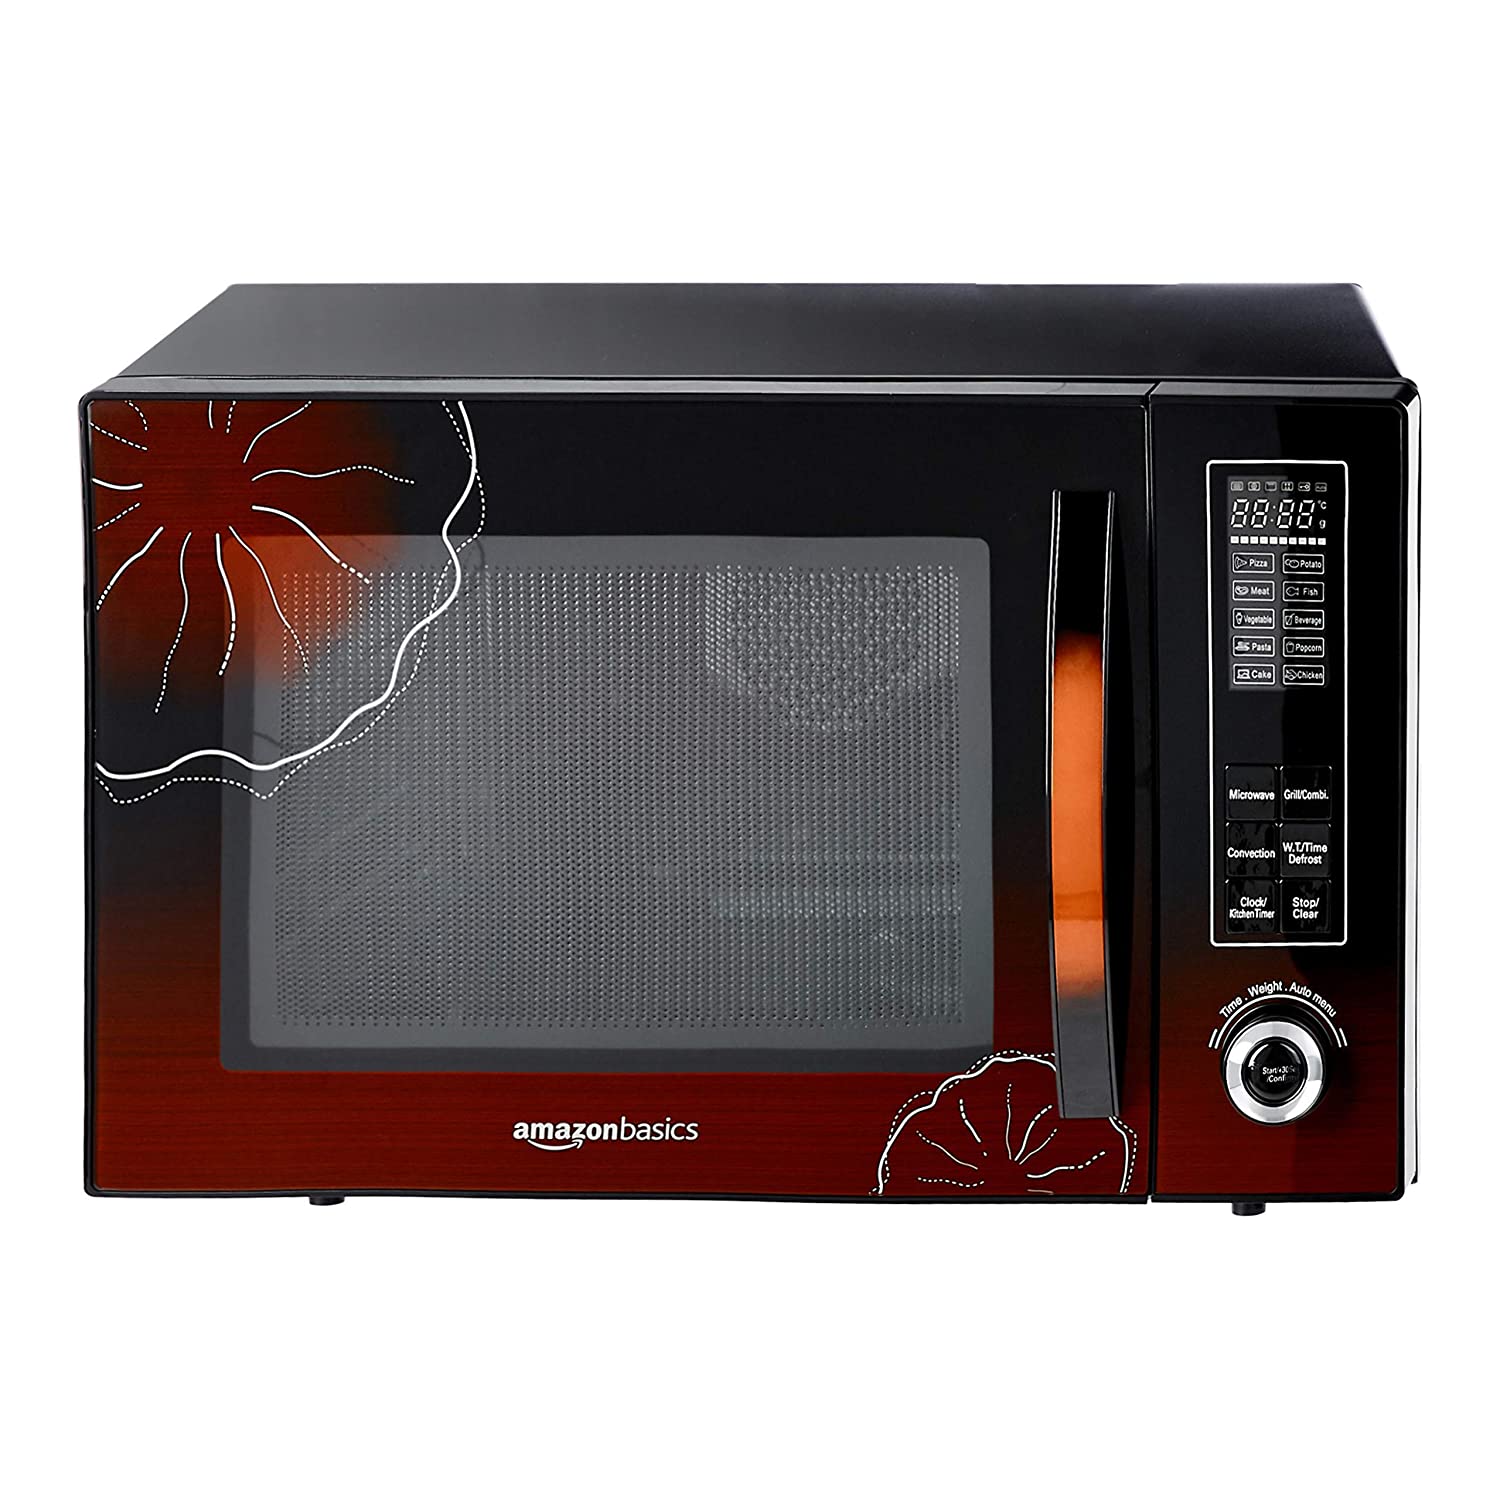 30 L capacity convection microwave for just 11,000